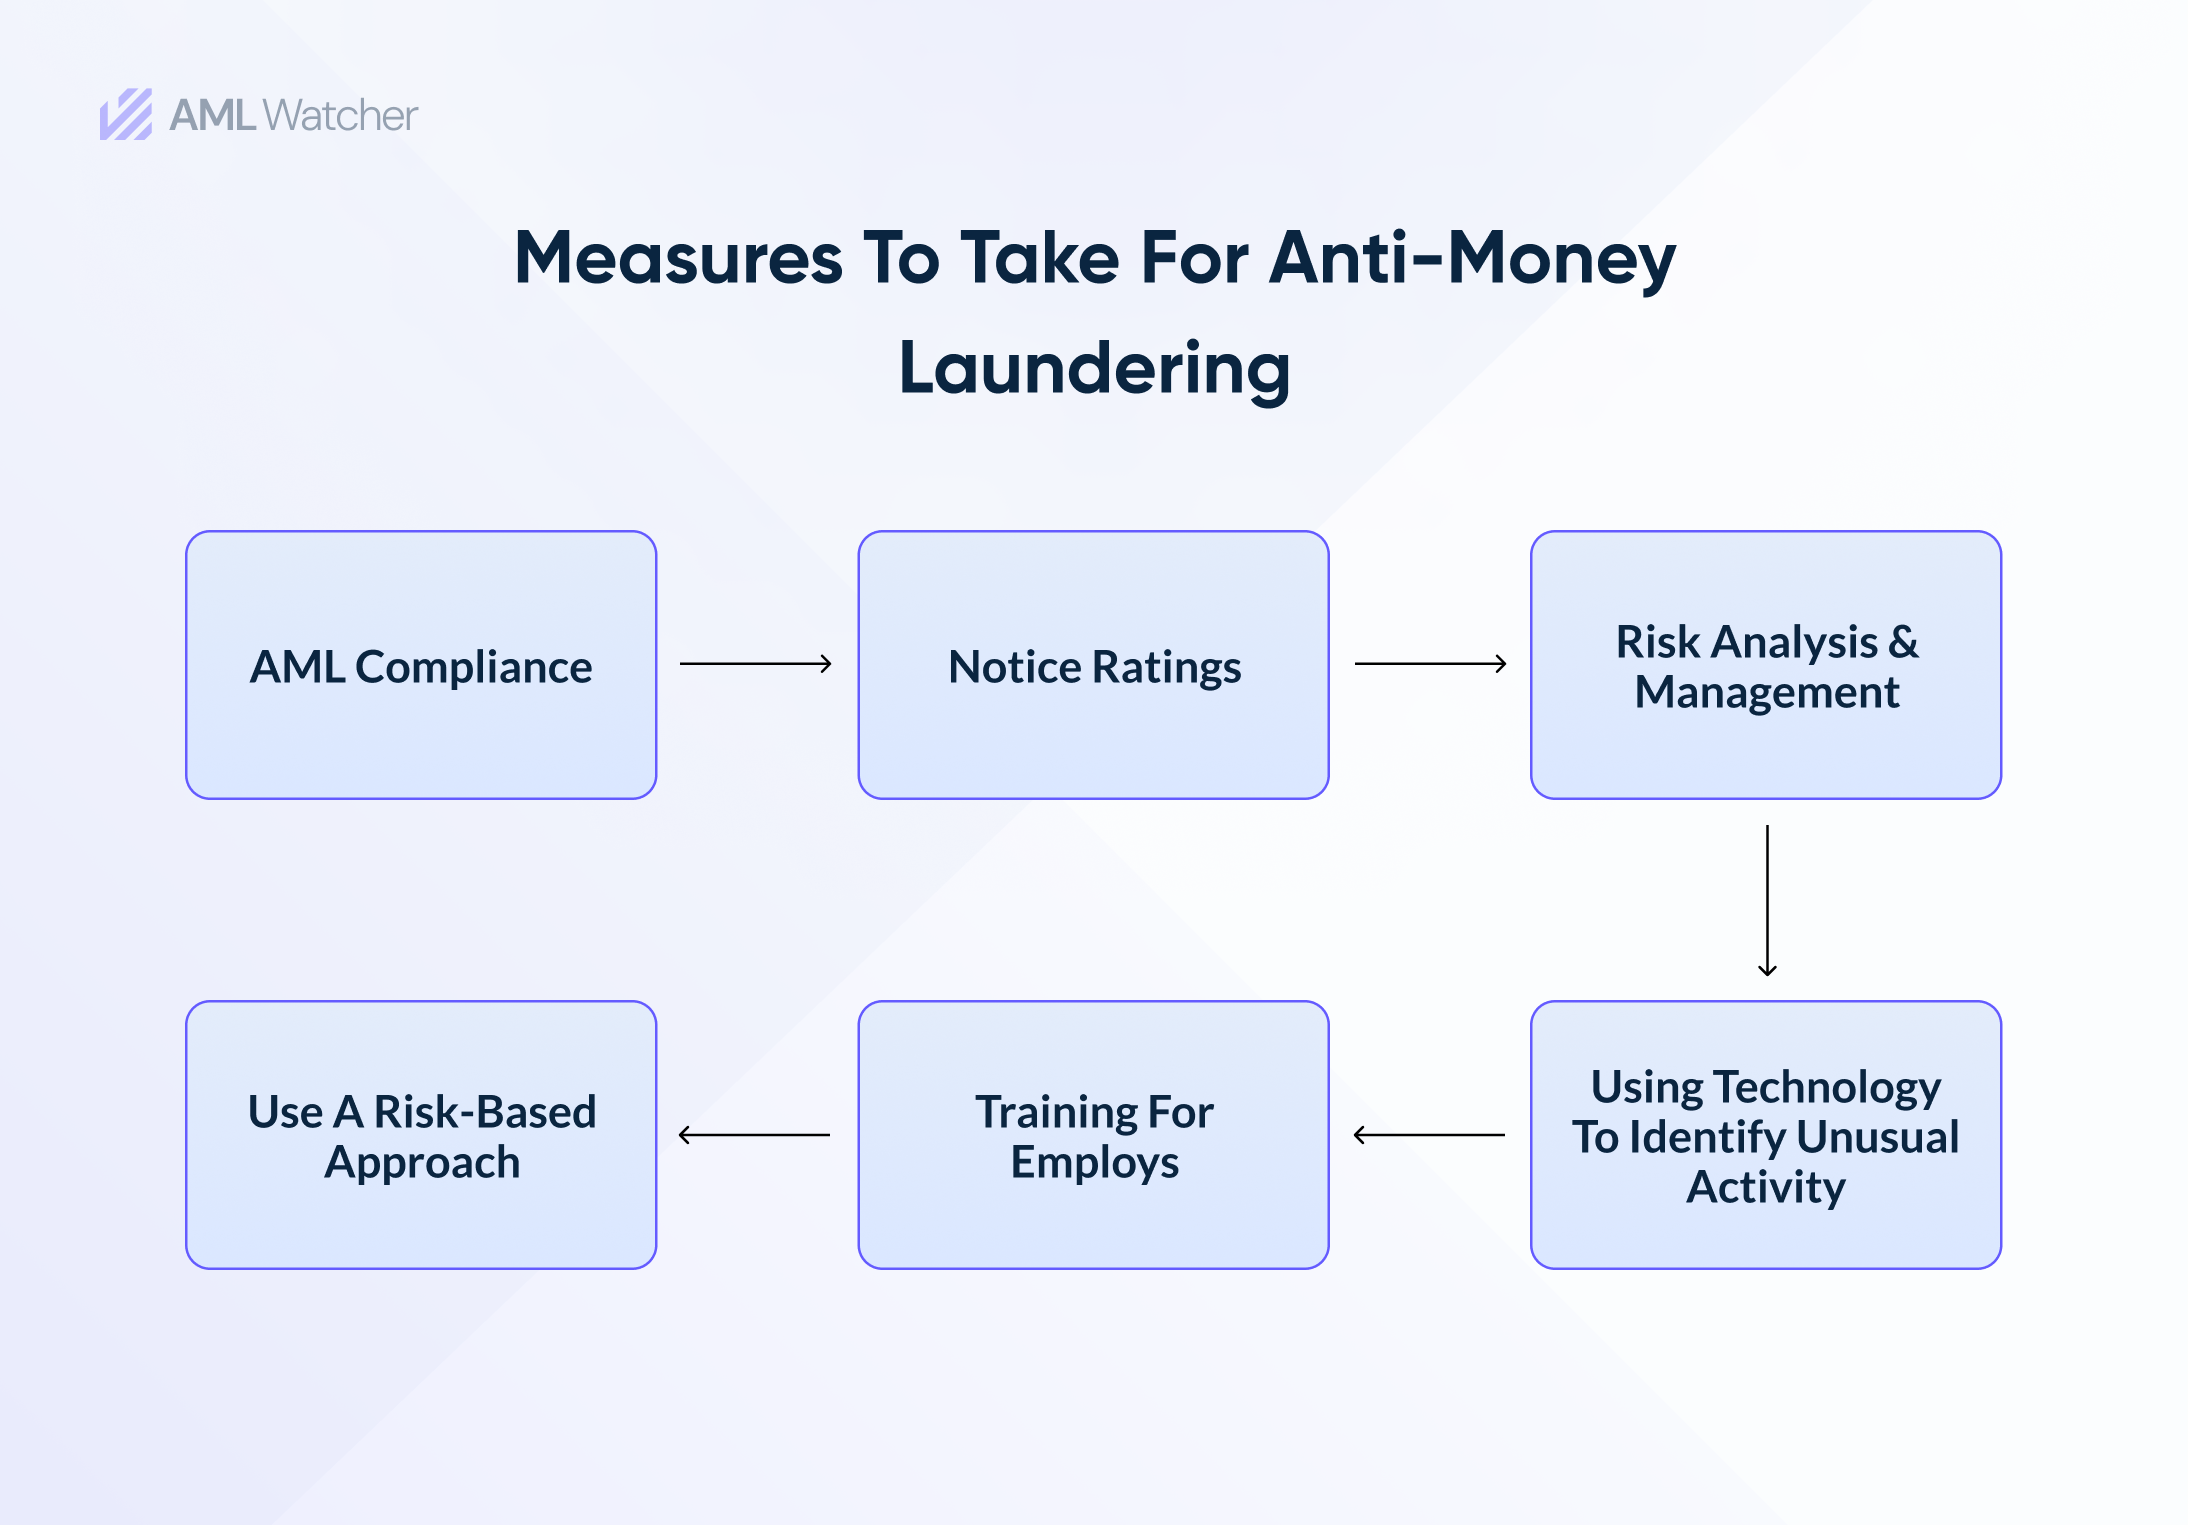 Measures to take for anti-money laundering.